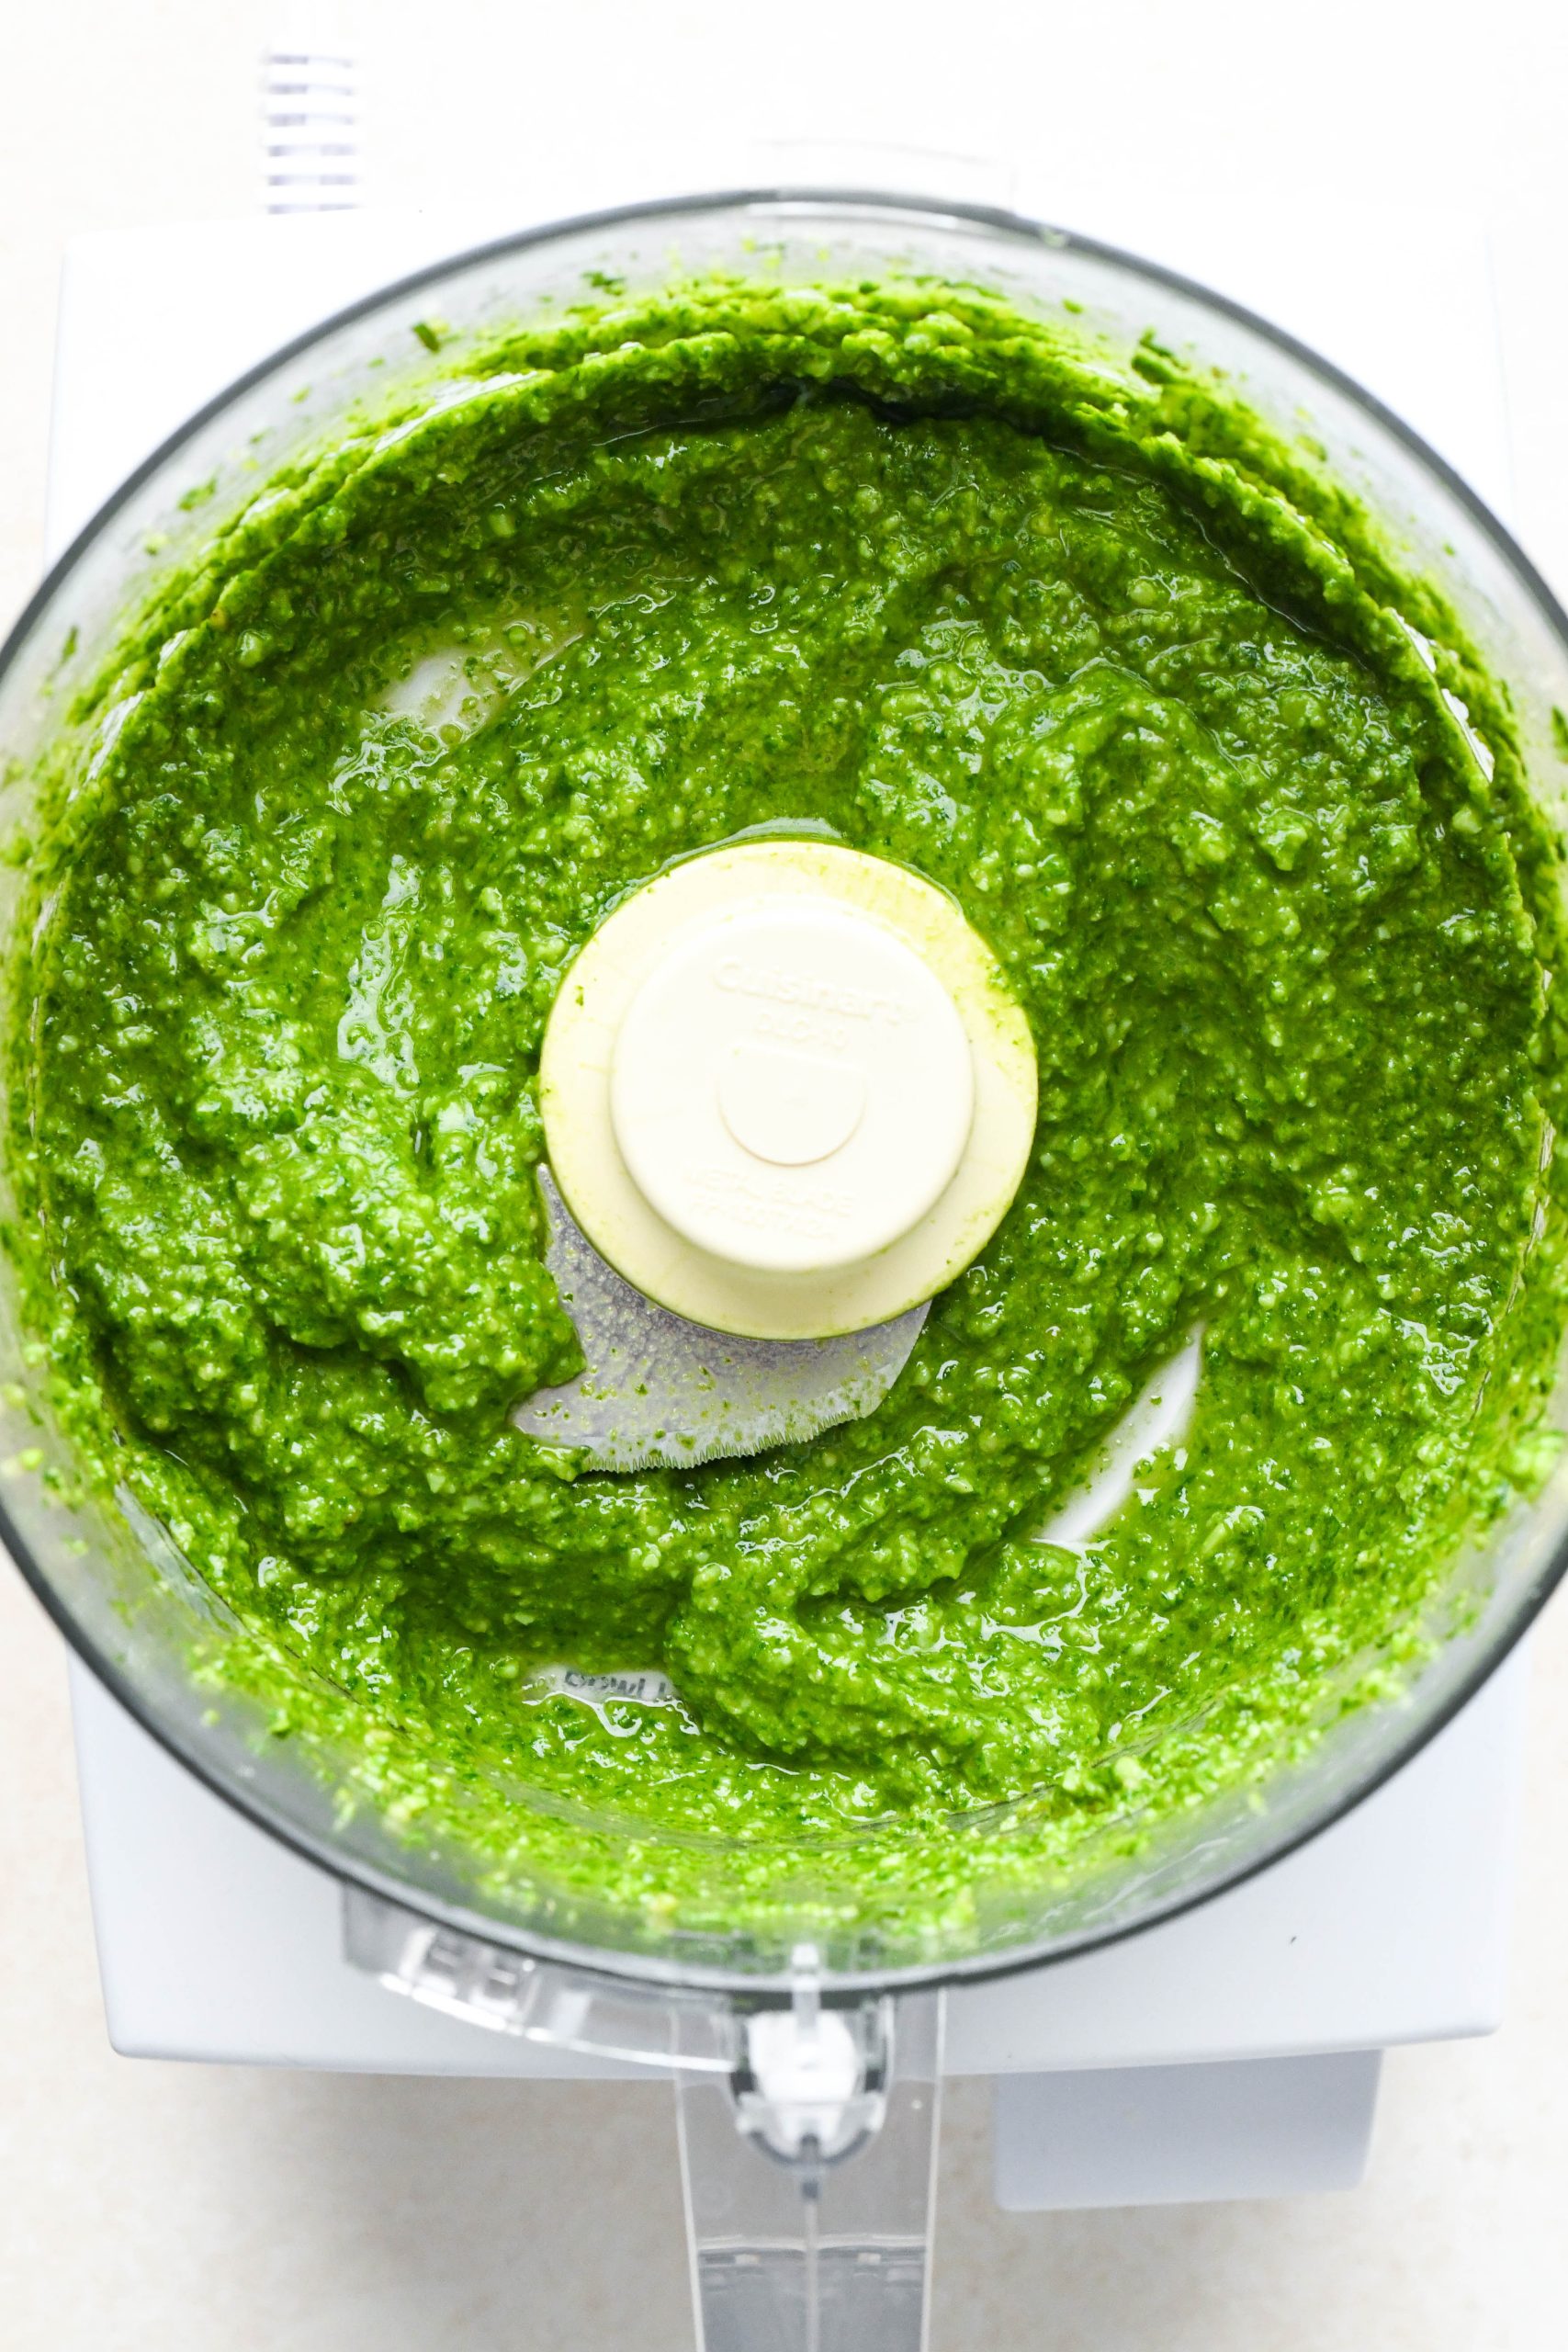 How to make homemade basil pesto: Finished creamy pesto in the bowl of food processor.